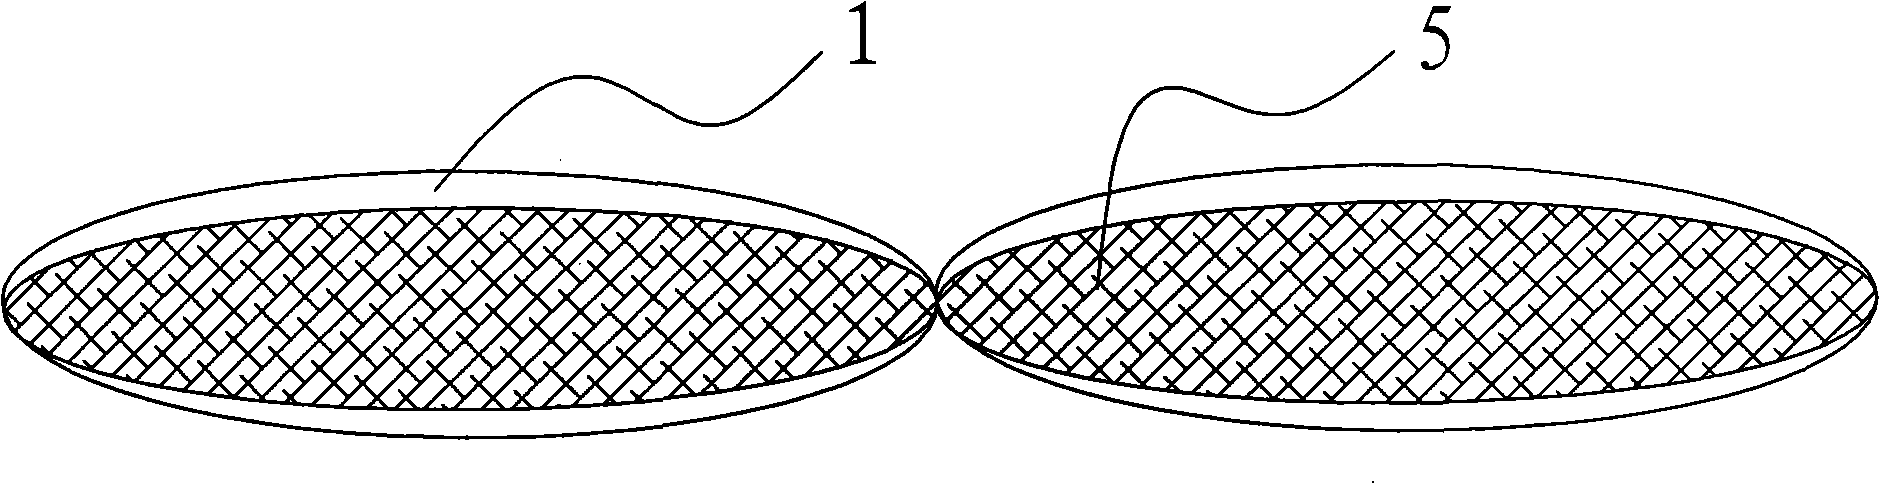 Duck wheat shell health care mattress and method for producing the same